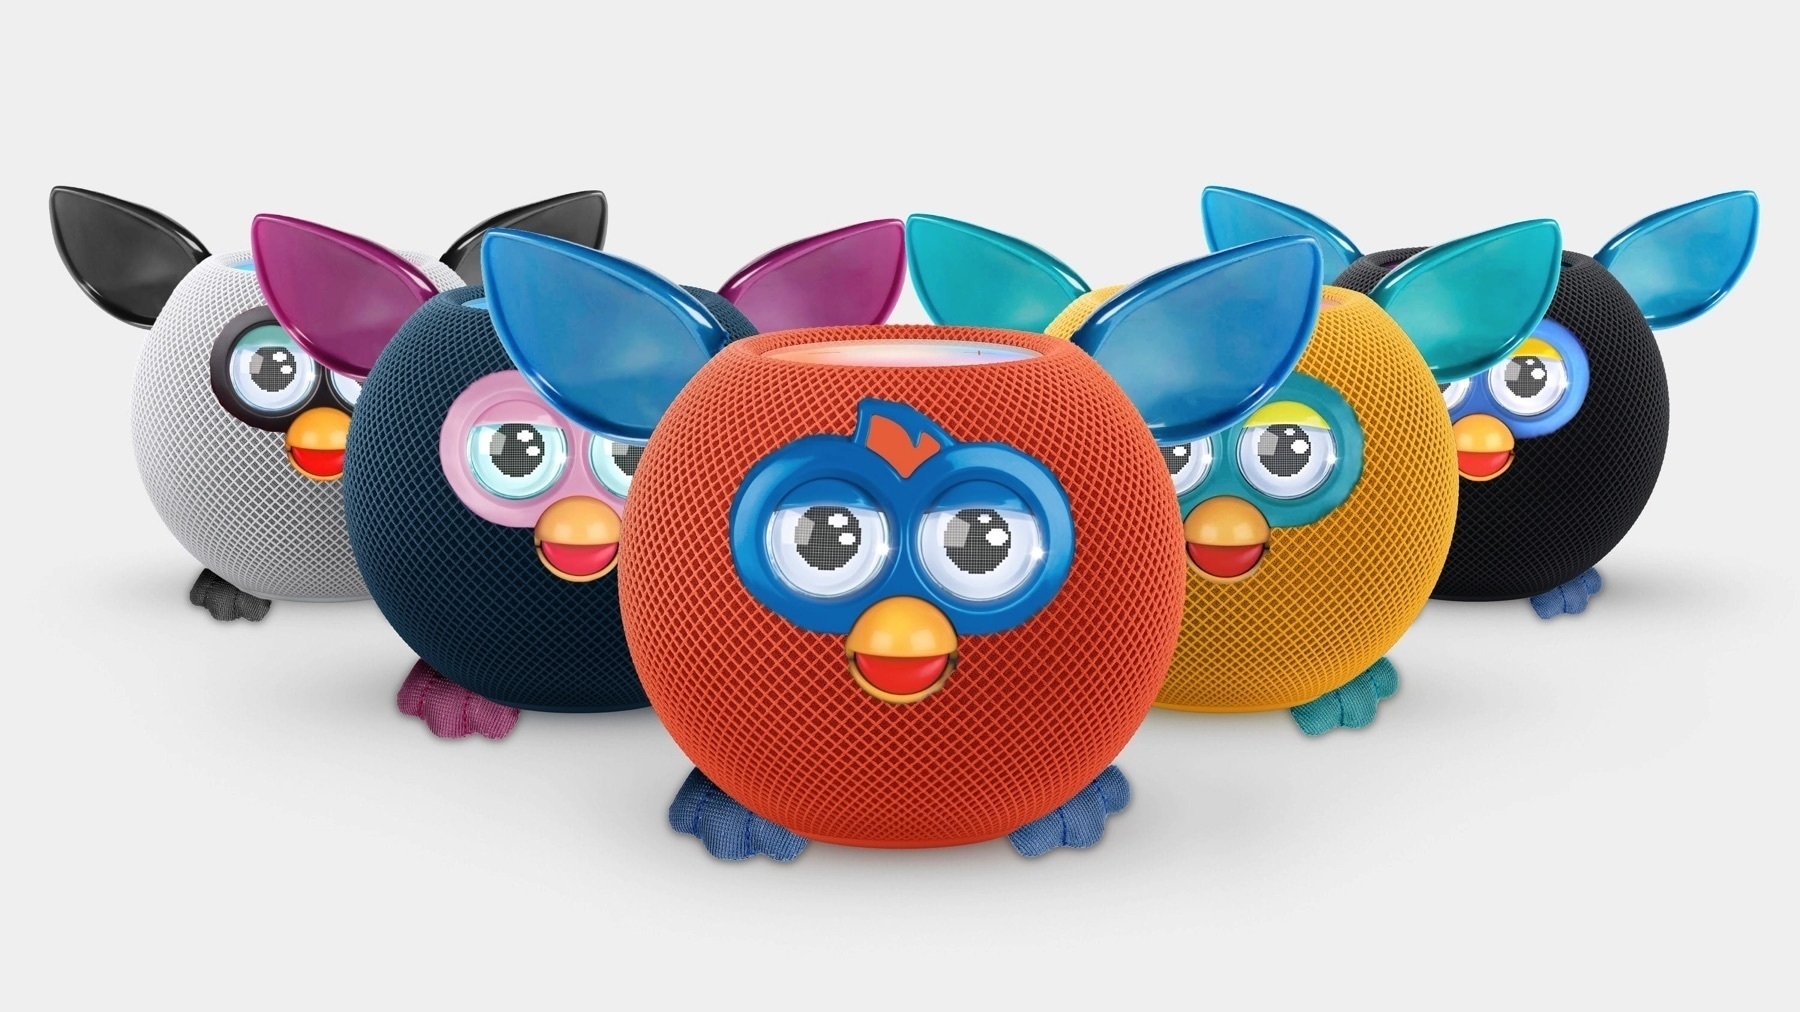 5 HomePod minis with Furby faces, ears, and feet.